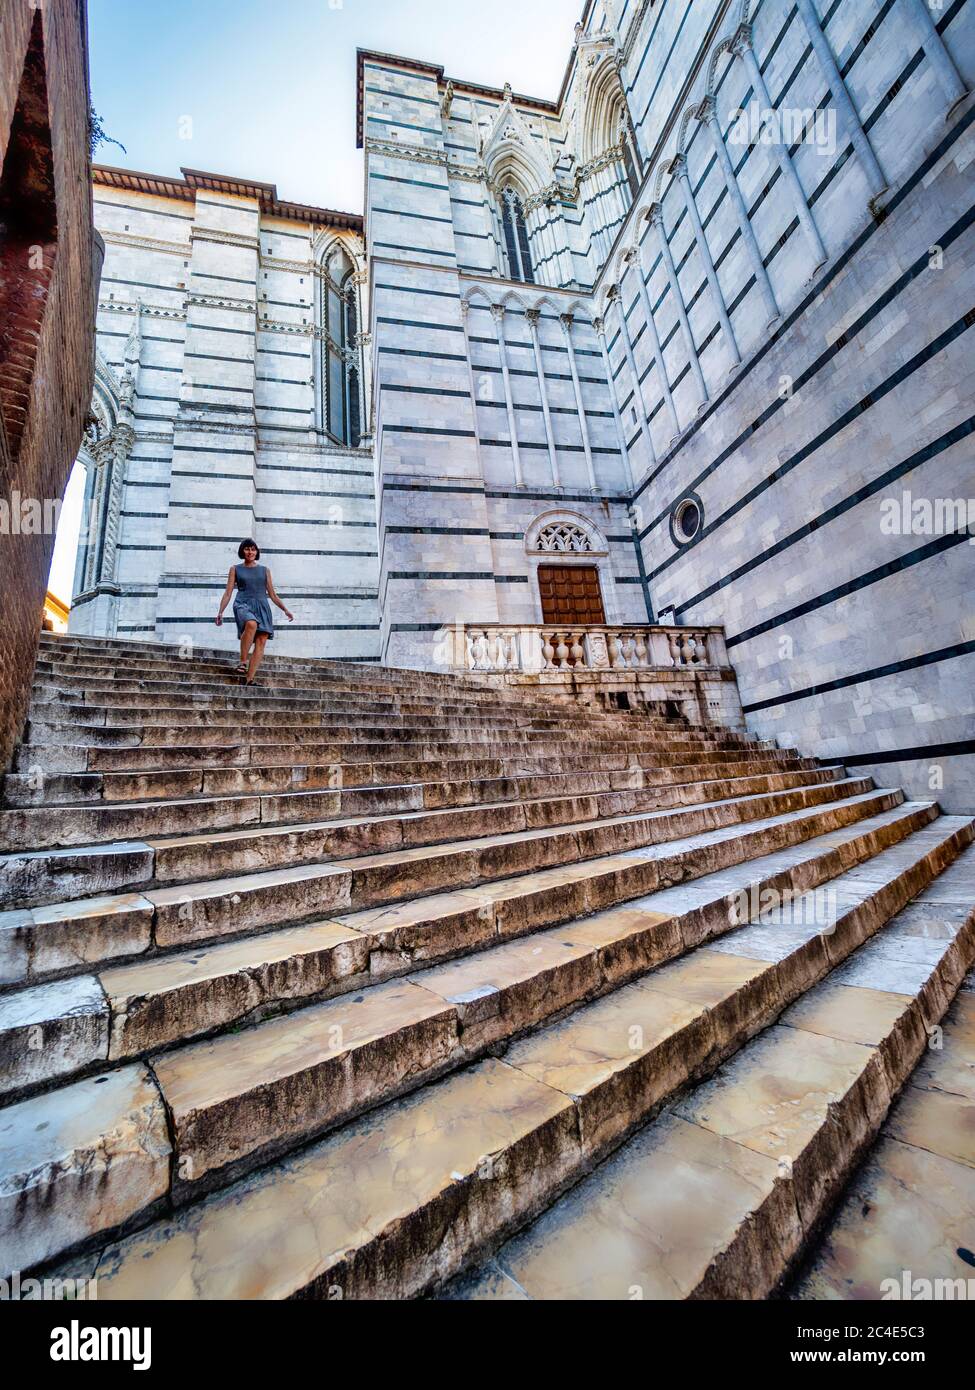 Caucasian female tourist descending marble steps outside Siena Cathedral Bapistery. Italy. Stock Photo